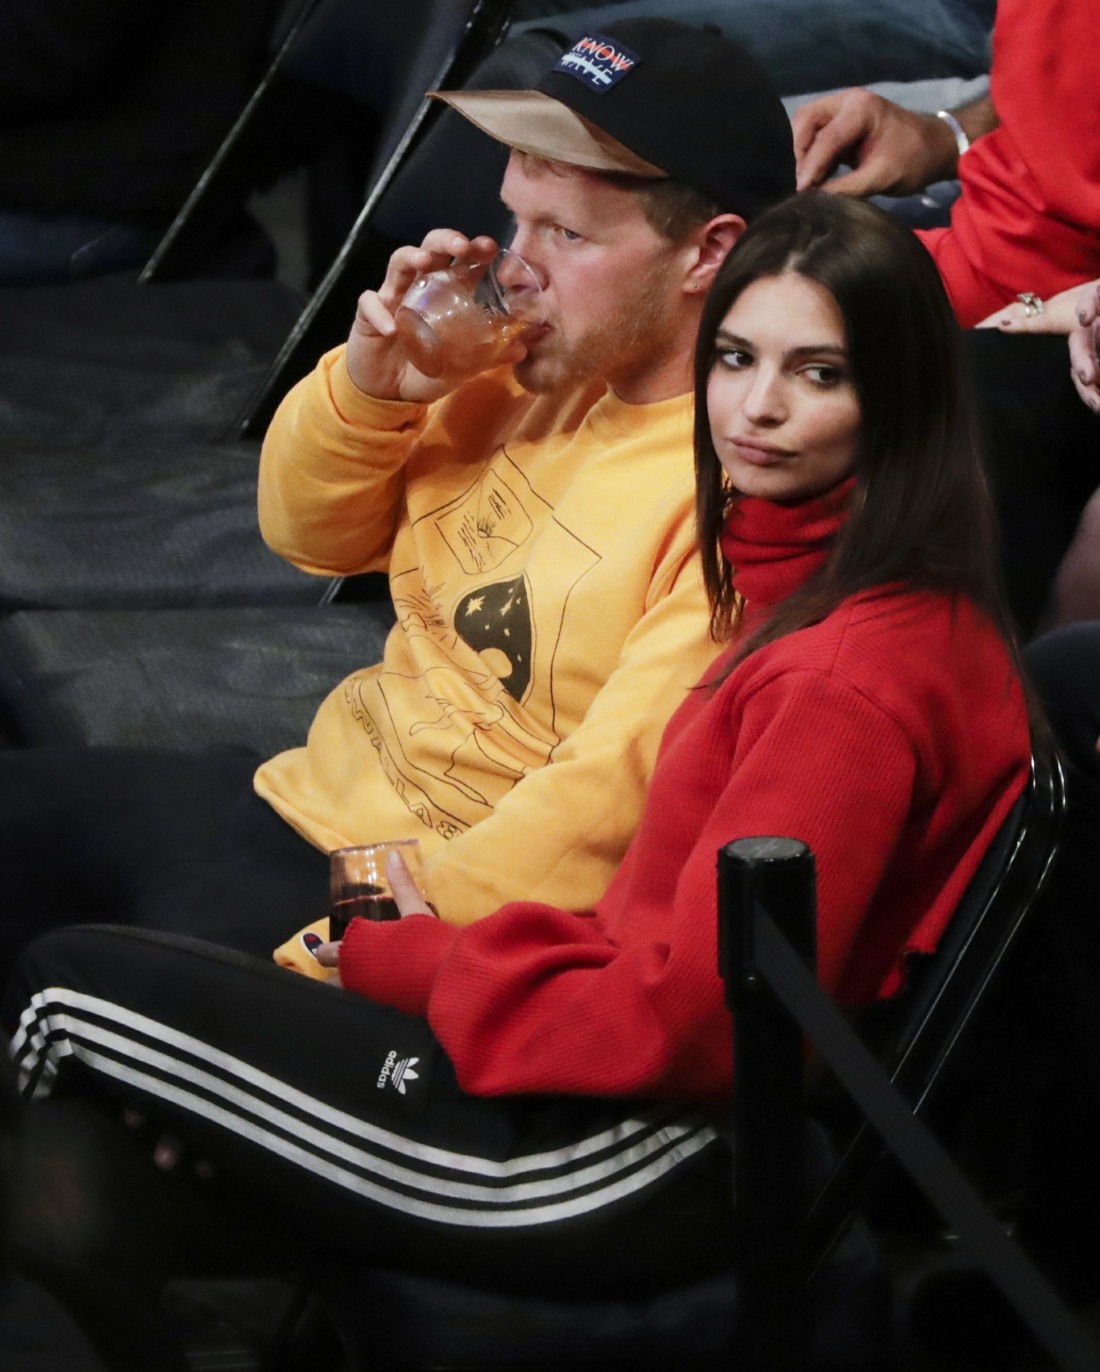 Emily Ratajkowski enjoys a drink and a game with a kiss happy mystery guy